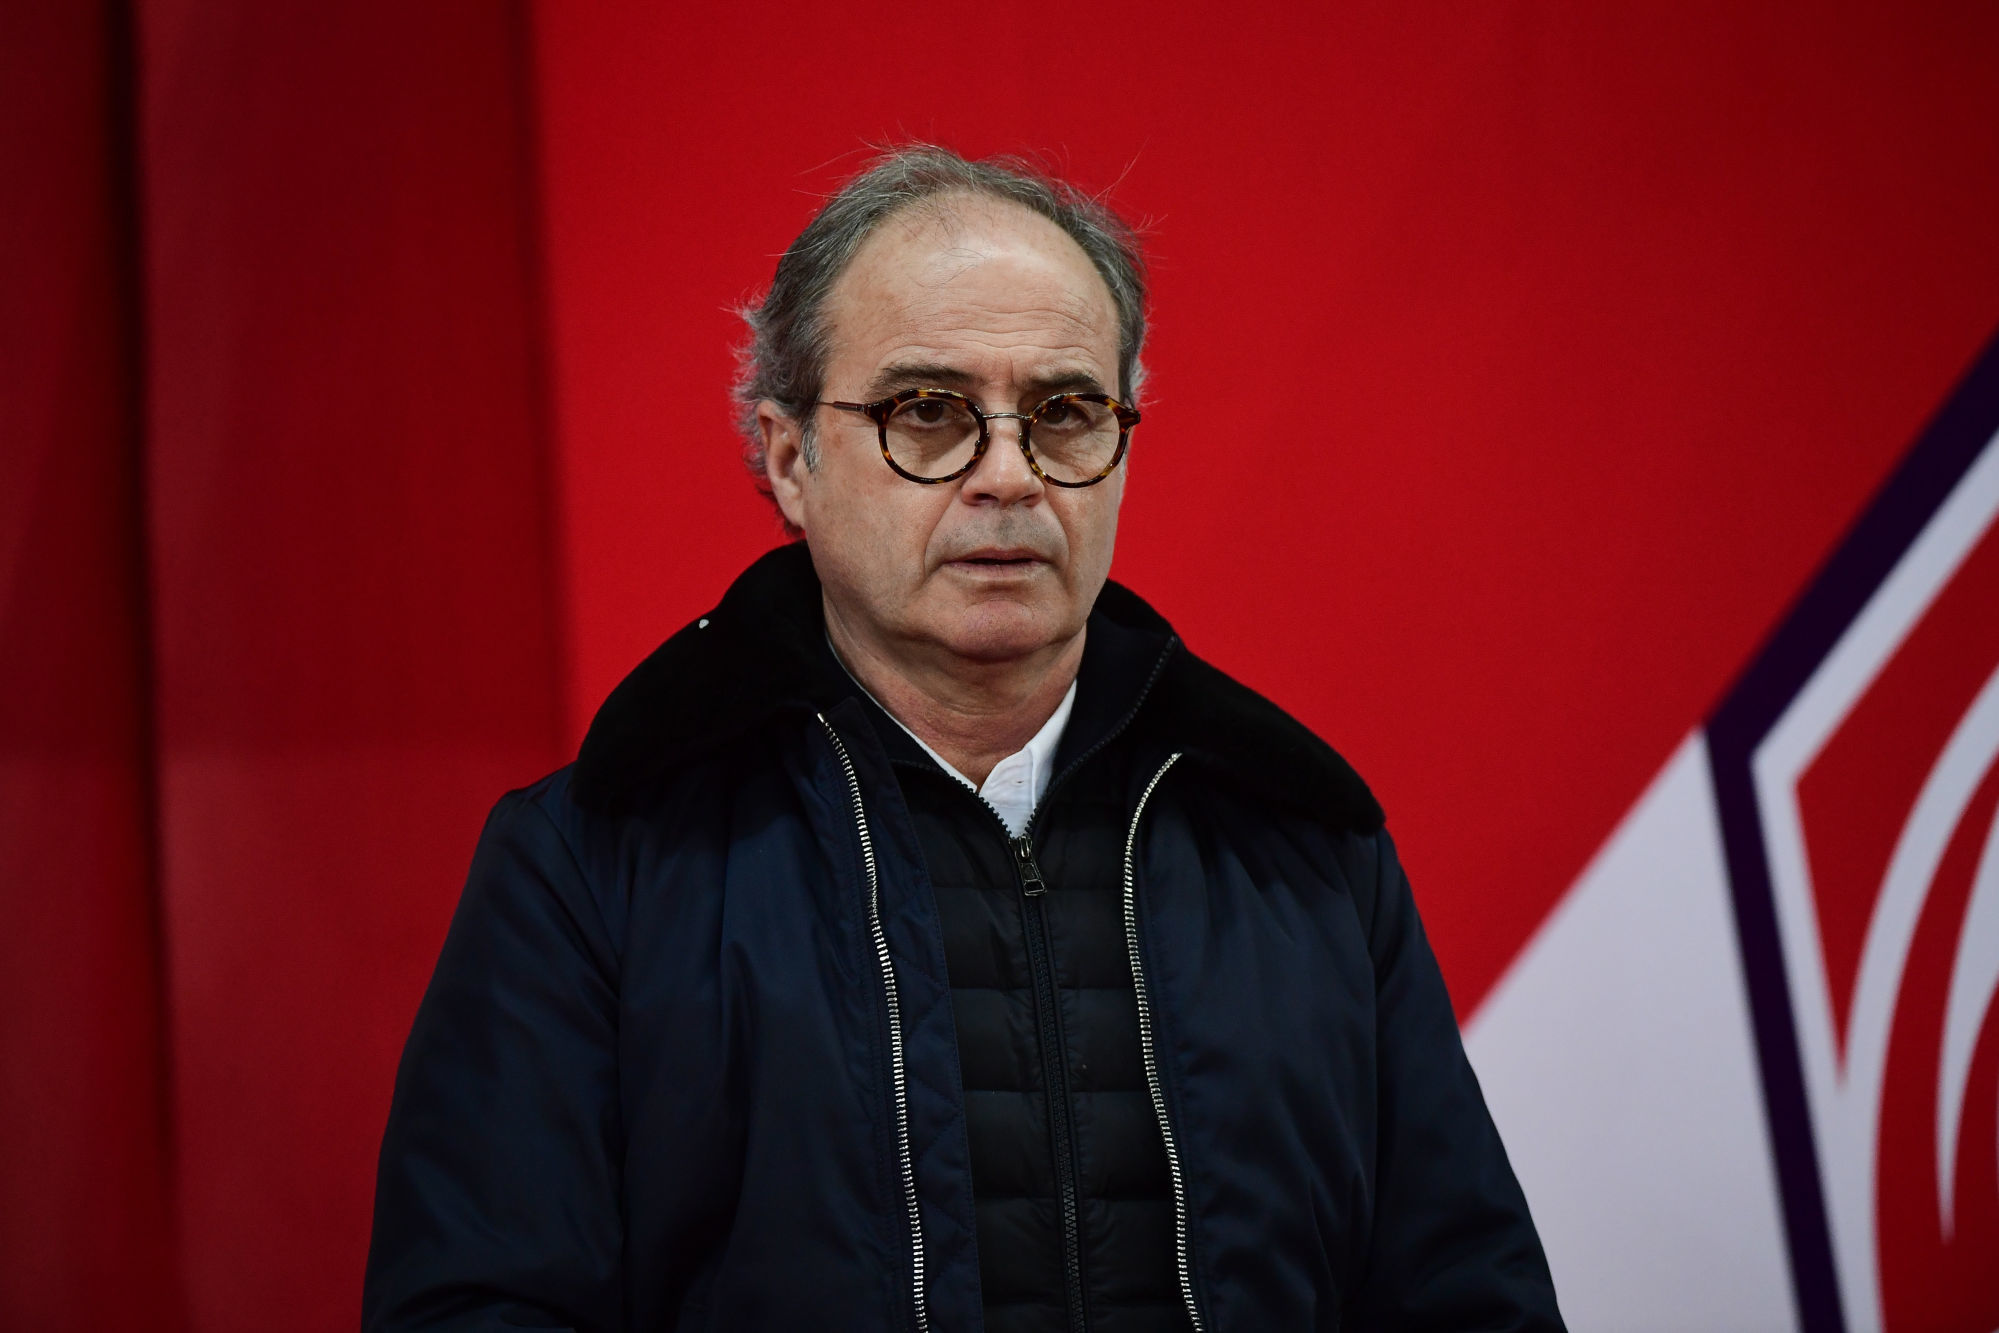 Lille sporting director Luis CAMPOS during the Ligue 1 match between Lille and Paris at Stade Pierre Mauroy on January 26, 2020 in Lille, France. (Photo by Dave Winter/Icon Sport) - Luis CAMPOS - Stade Pierre Mauroy - Lille (France)